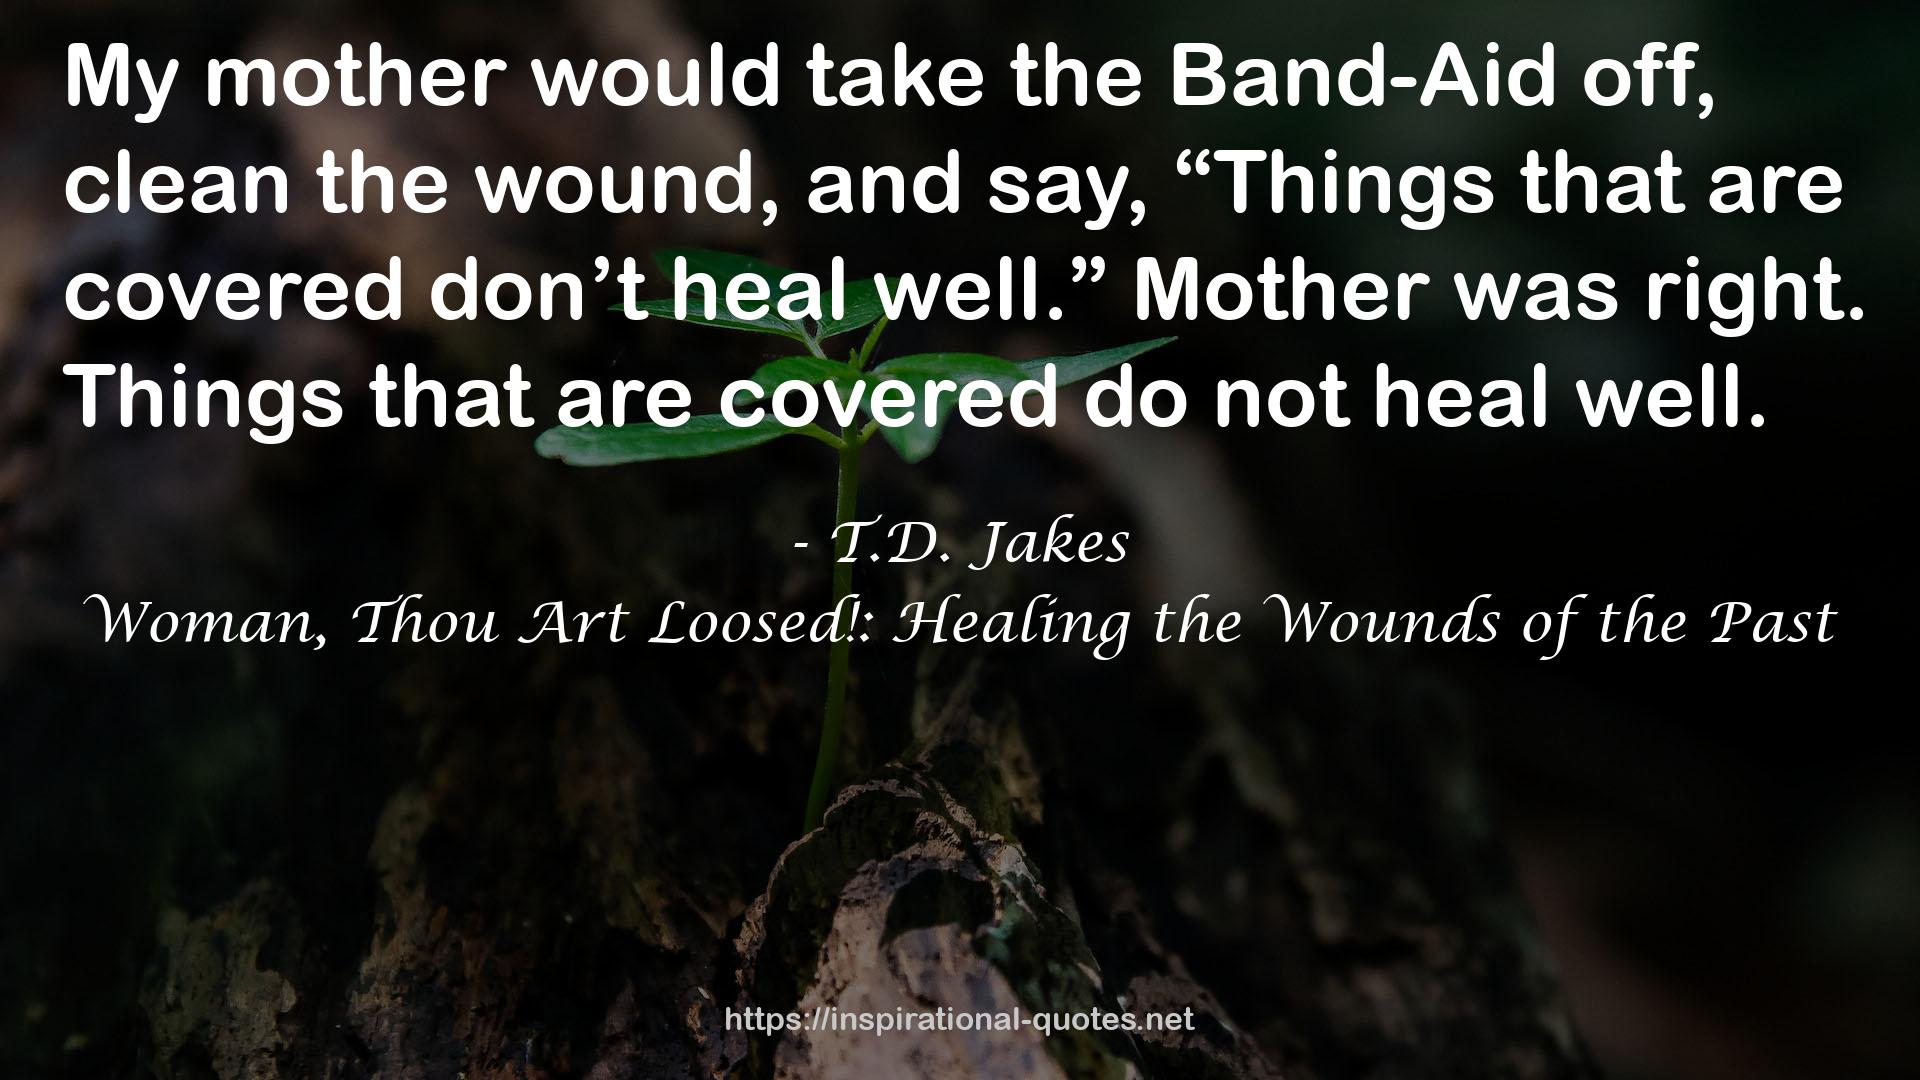 Woman, Thou Art Loosed!: Healing the Wounds of the Past QUOTES